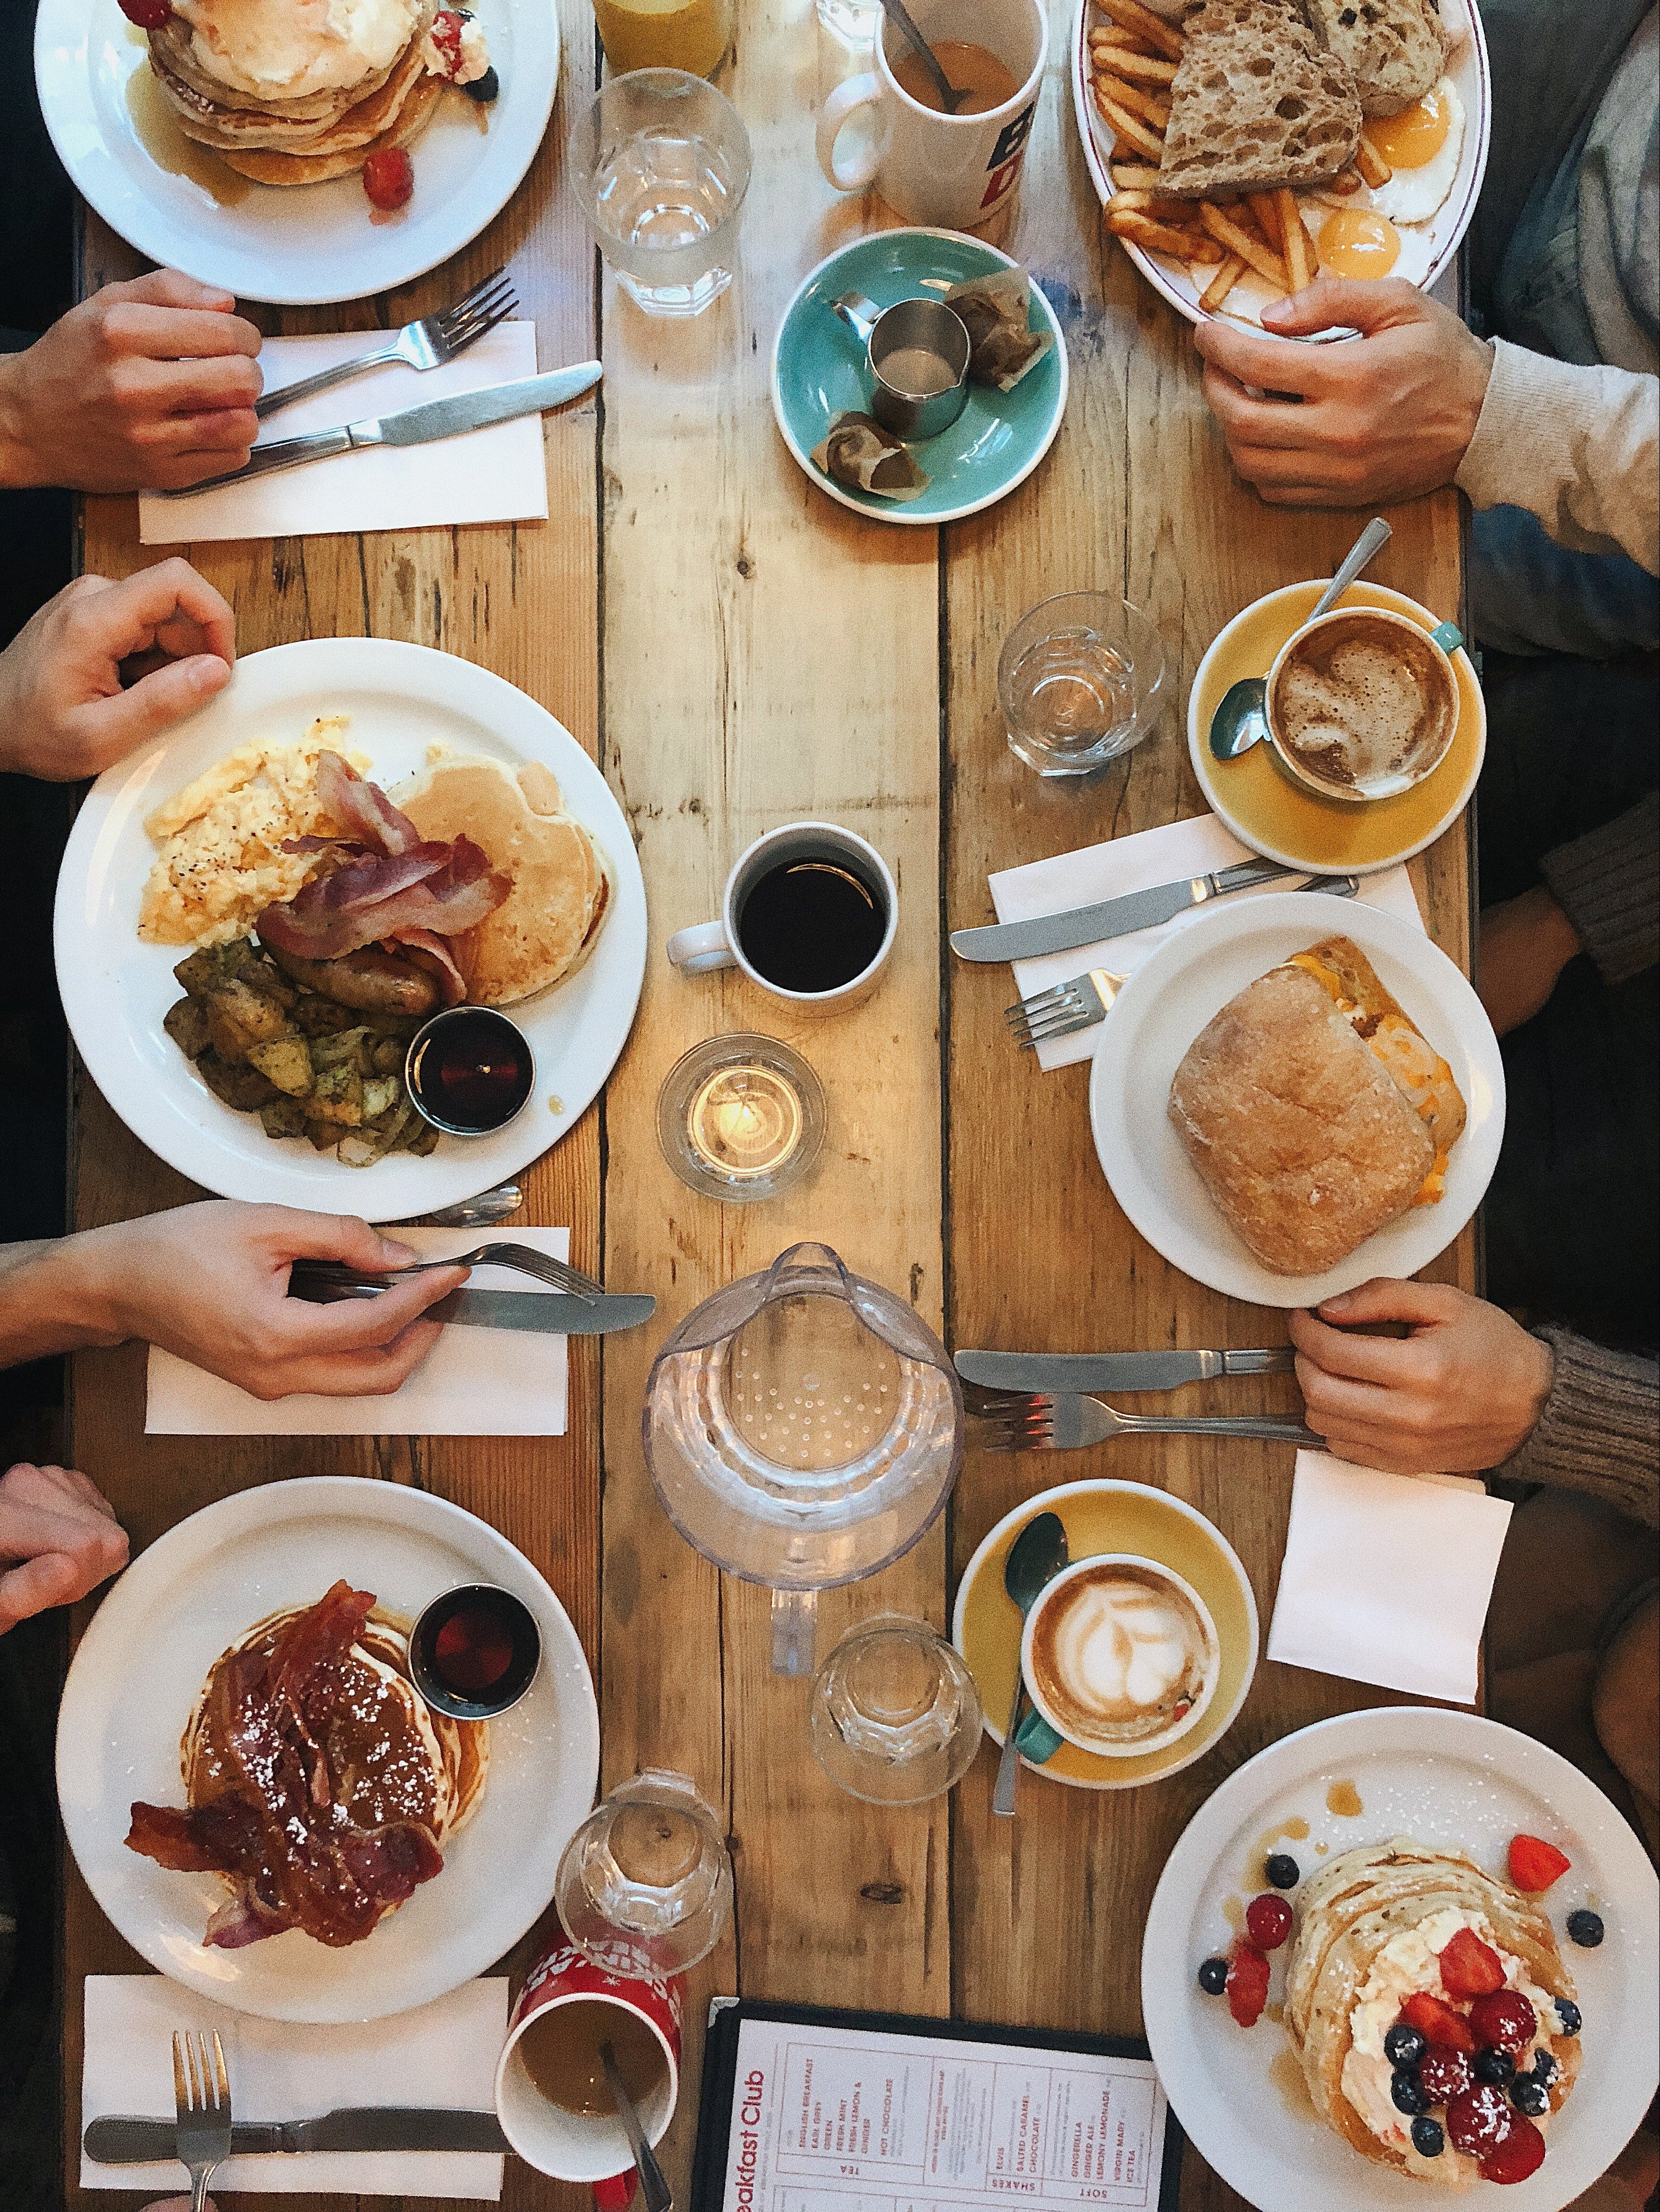 A long table filled with food. | Pexels